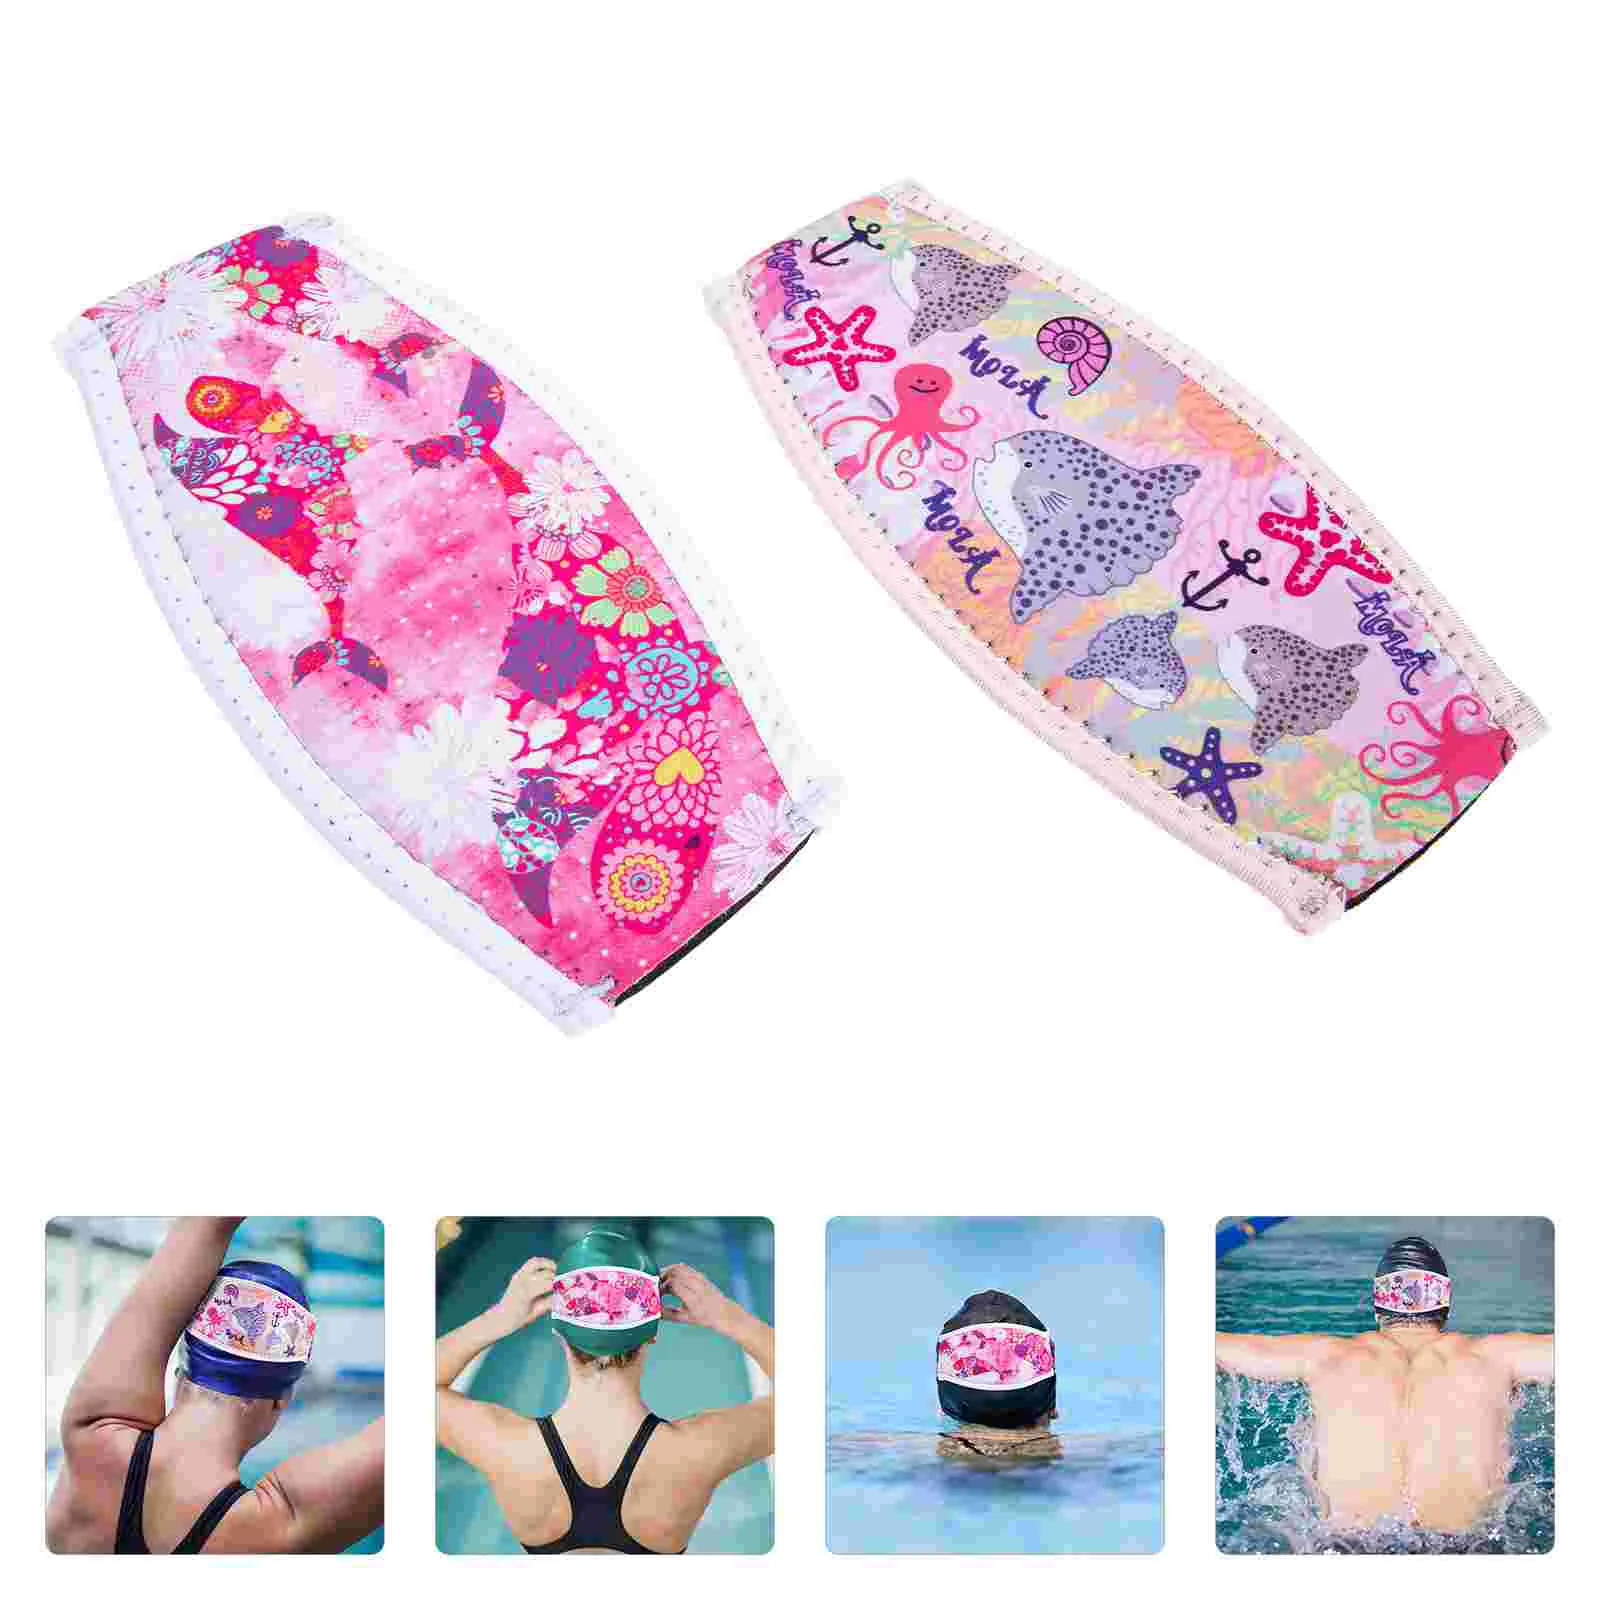 

Strap Diving Cover Dive Masks Neoprene Covers Swimming Straps Hair Snorkel Mask Swim Protector Wrapping Goggle Waterproof Slap